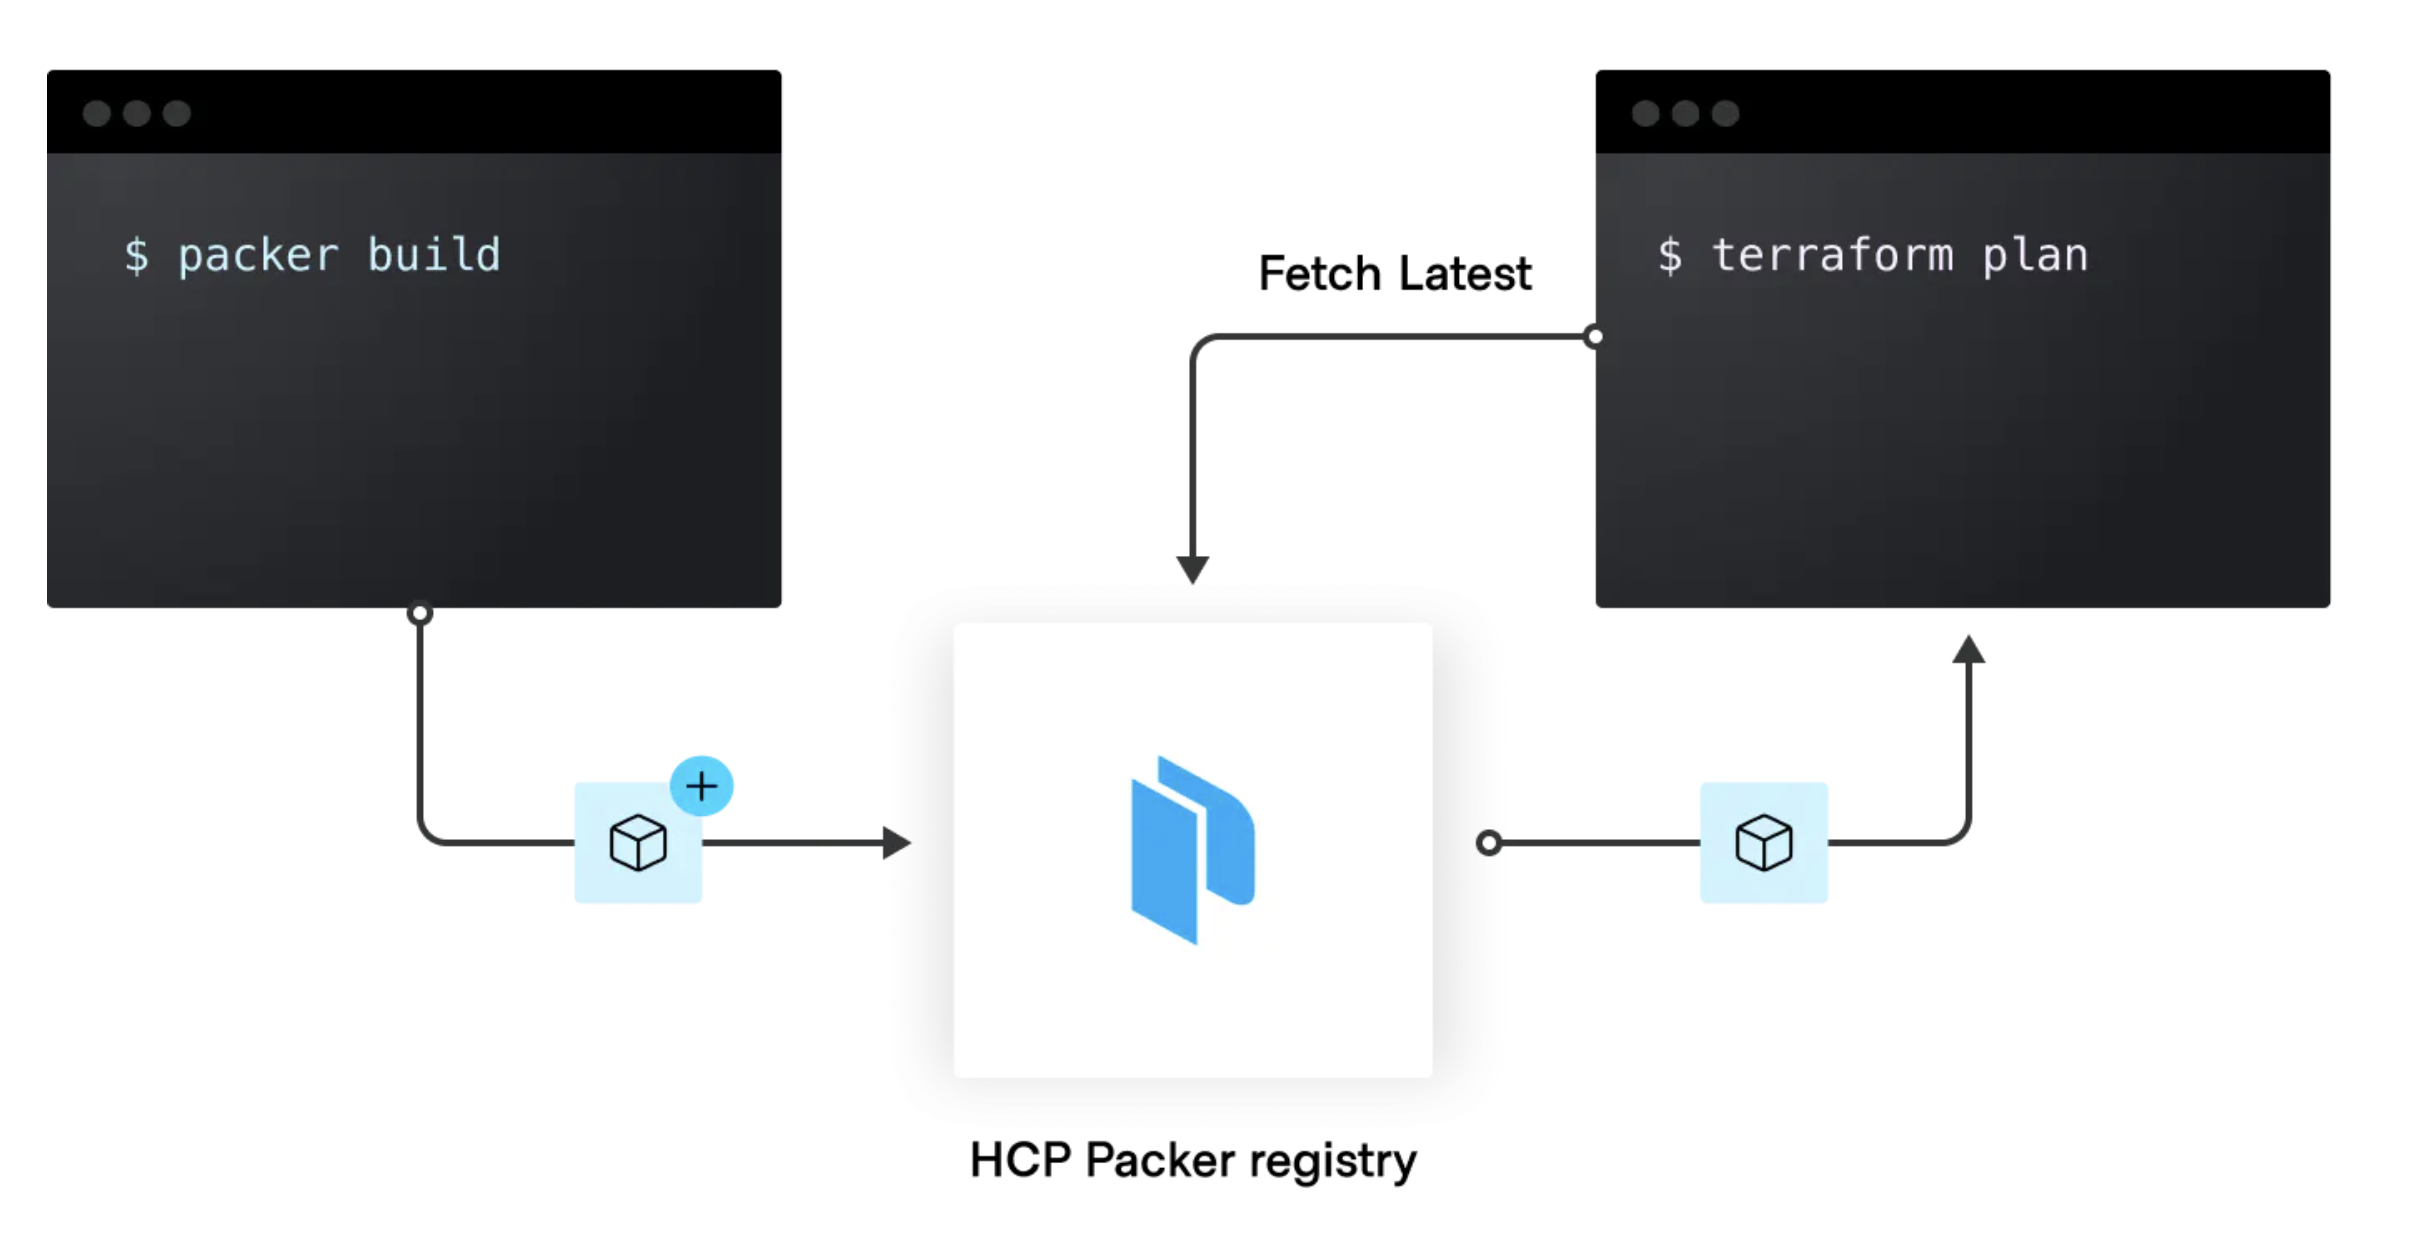 Reference the HCP Packer registry directly from Terraform Cloud